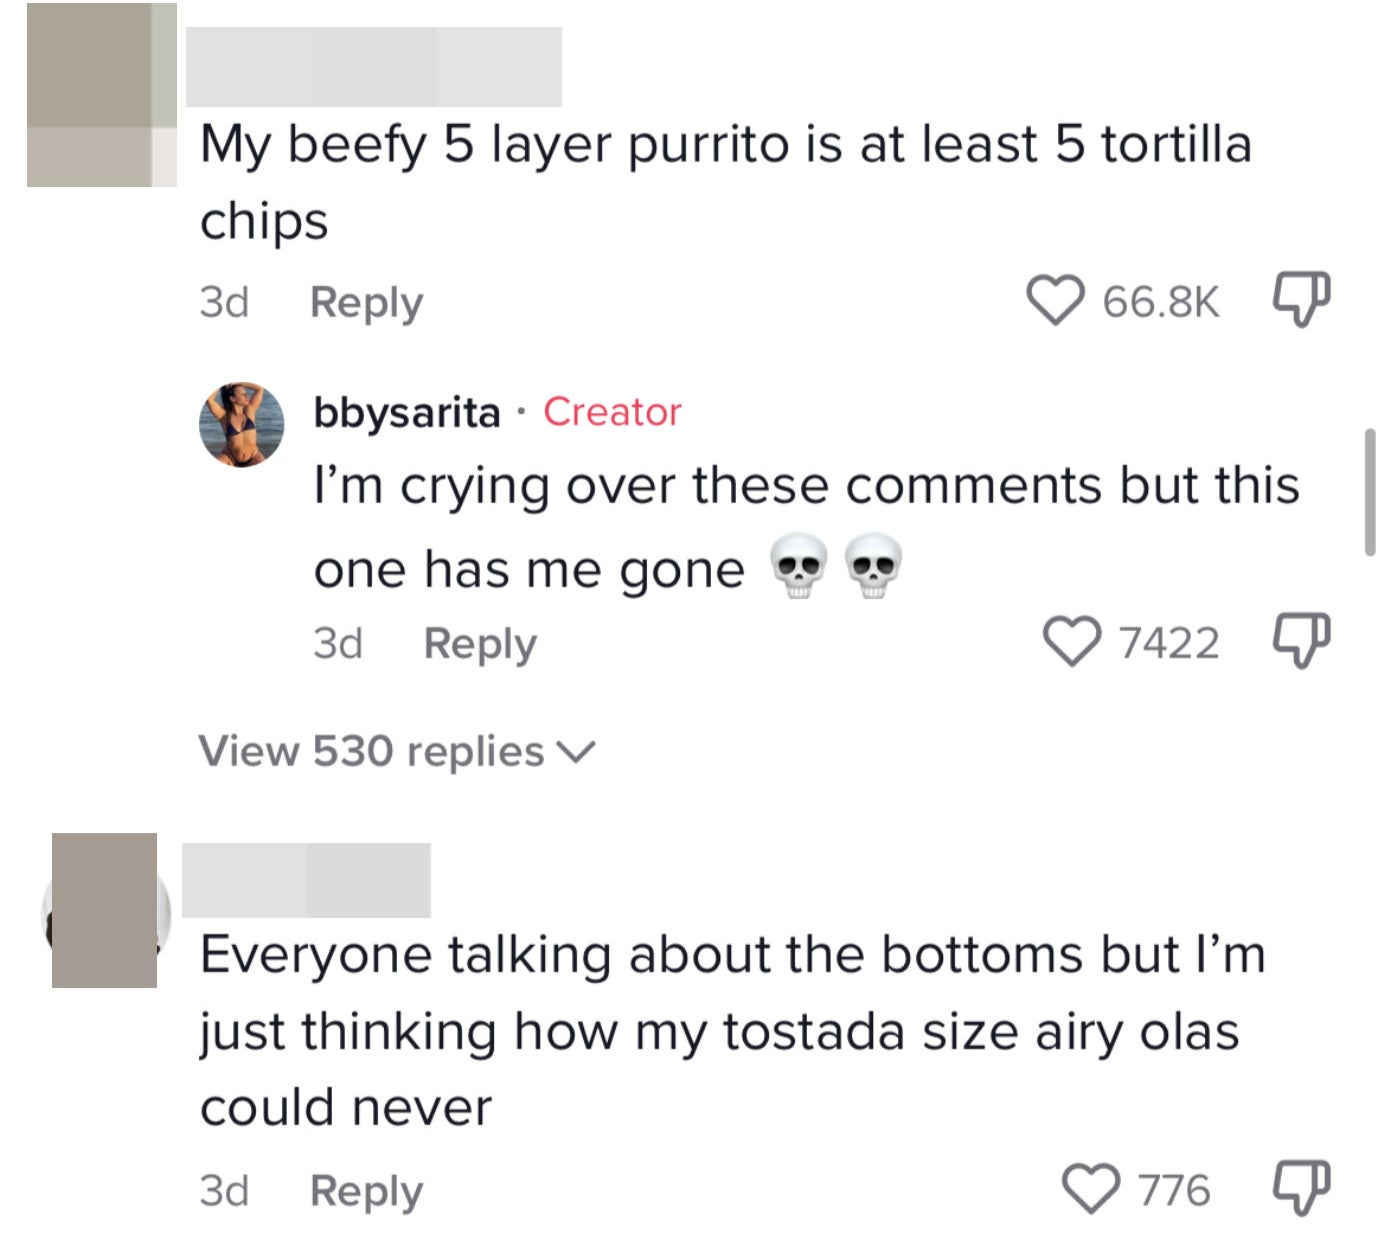 One person said, &quot;My beefy 5 layer purrito is at least 5 tortilla chips&quot; while someone else said, &quot;Everyone talking about the bottoms but I&#x27;m just thinking how my tostada size areolas could never&quot;